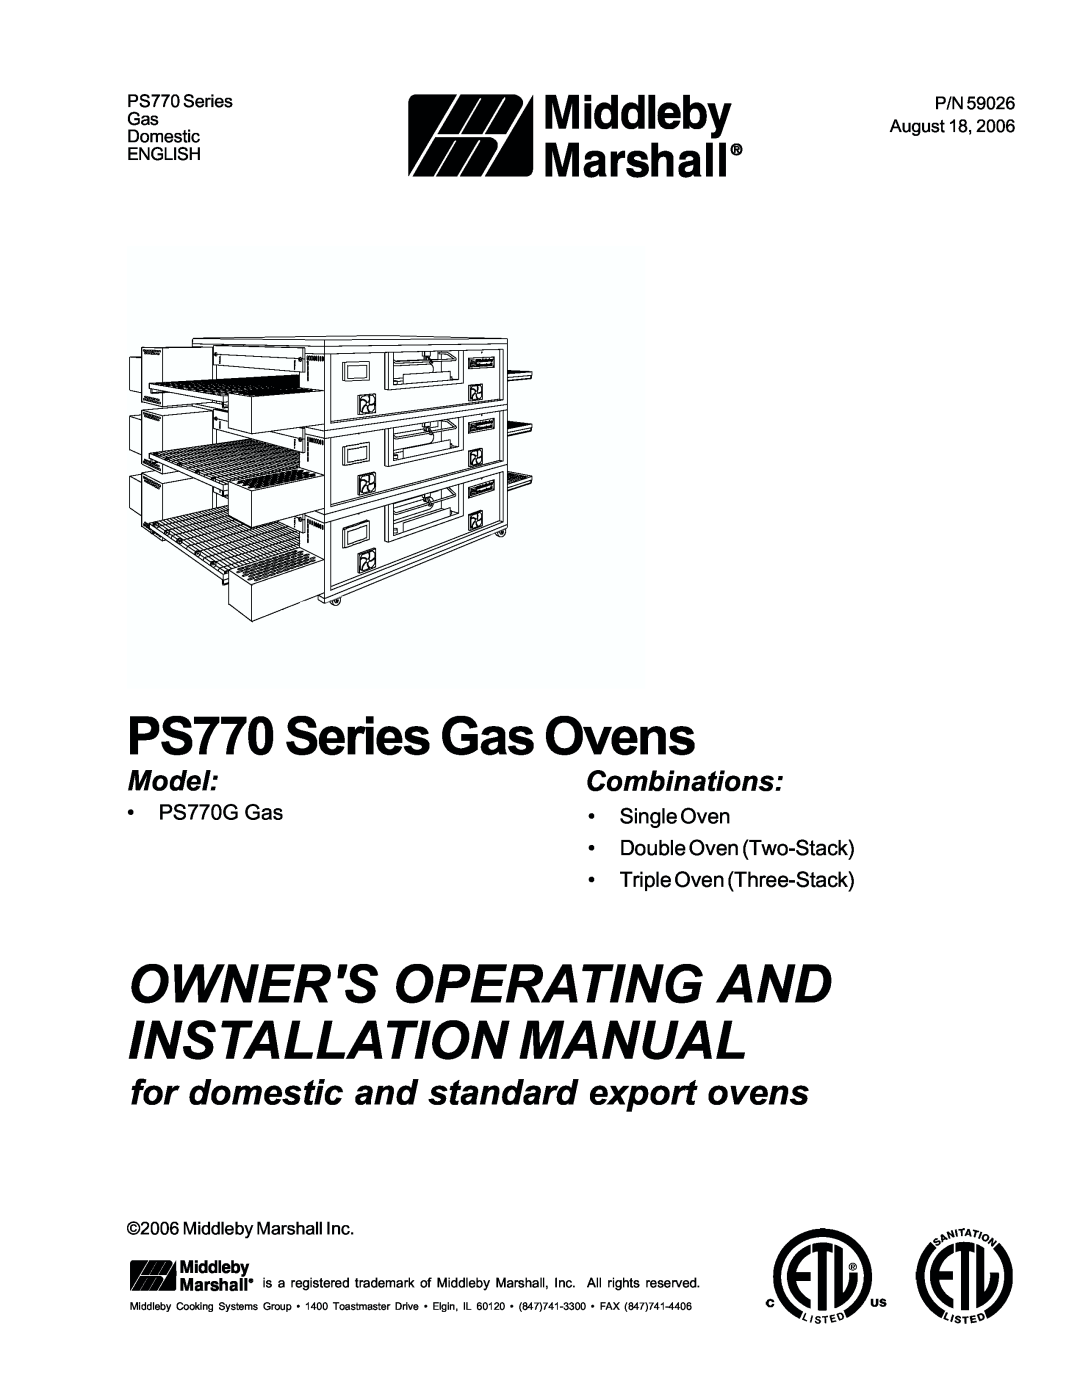 Middleby Marshall PS770G GAS installation manual PS770 Series Gas Ovens, Owners Operating And Installation Manual, Model 